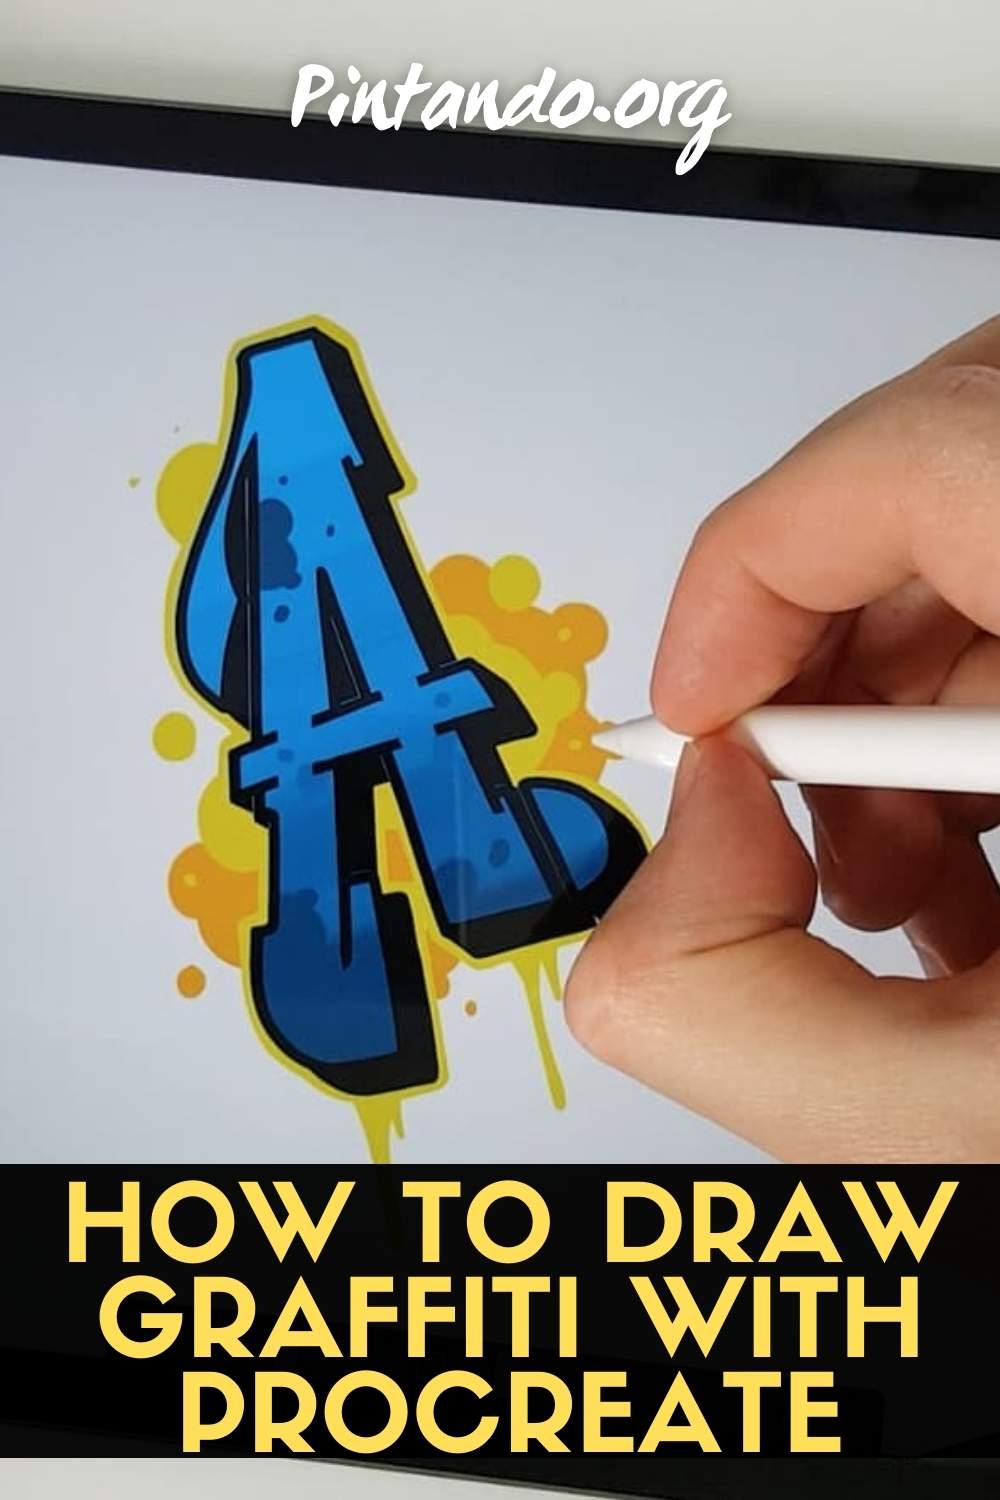 How to Draw Graffiti with Procreate